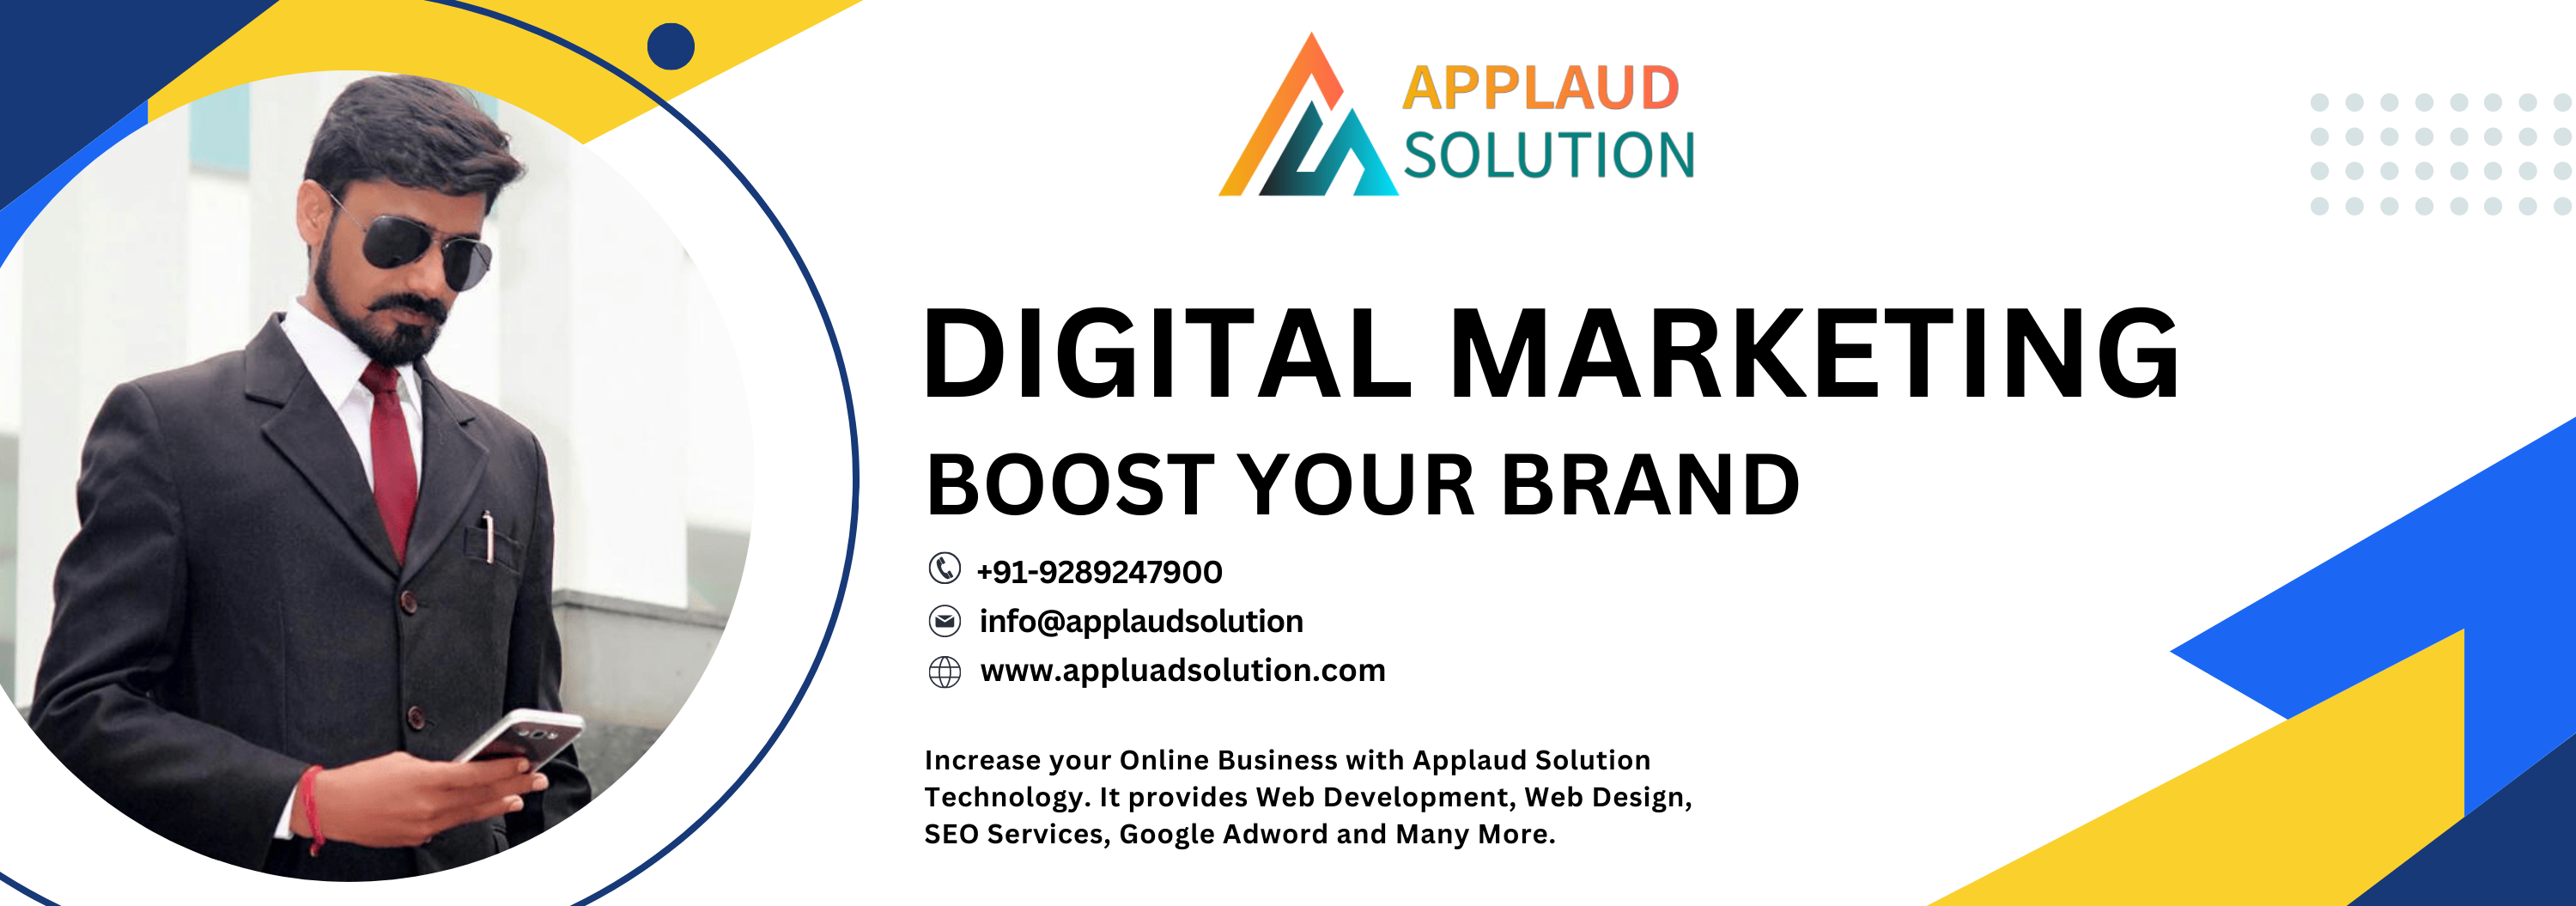 ) JD
/4/\ SOLUTION

DIGITAL MARKETING
BOOST YOUR BRAND

® +91-9289247900
& info@applaudsolution
& www.appluadsolution.com

Increase your Online Business with Applaud Solution
Technology. It provides Web Development, Web Design,
SEO Services, Google Adword and Many More.